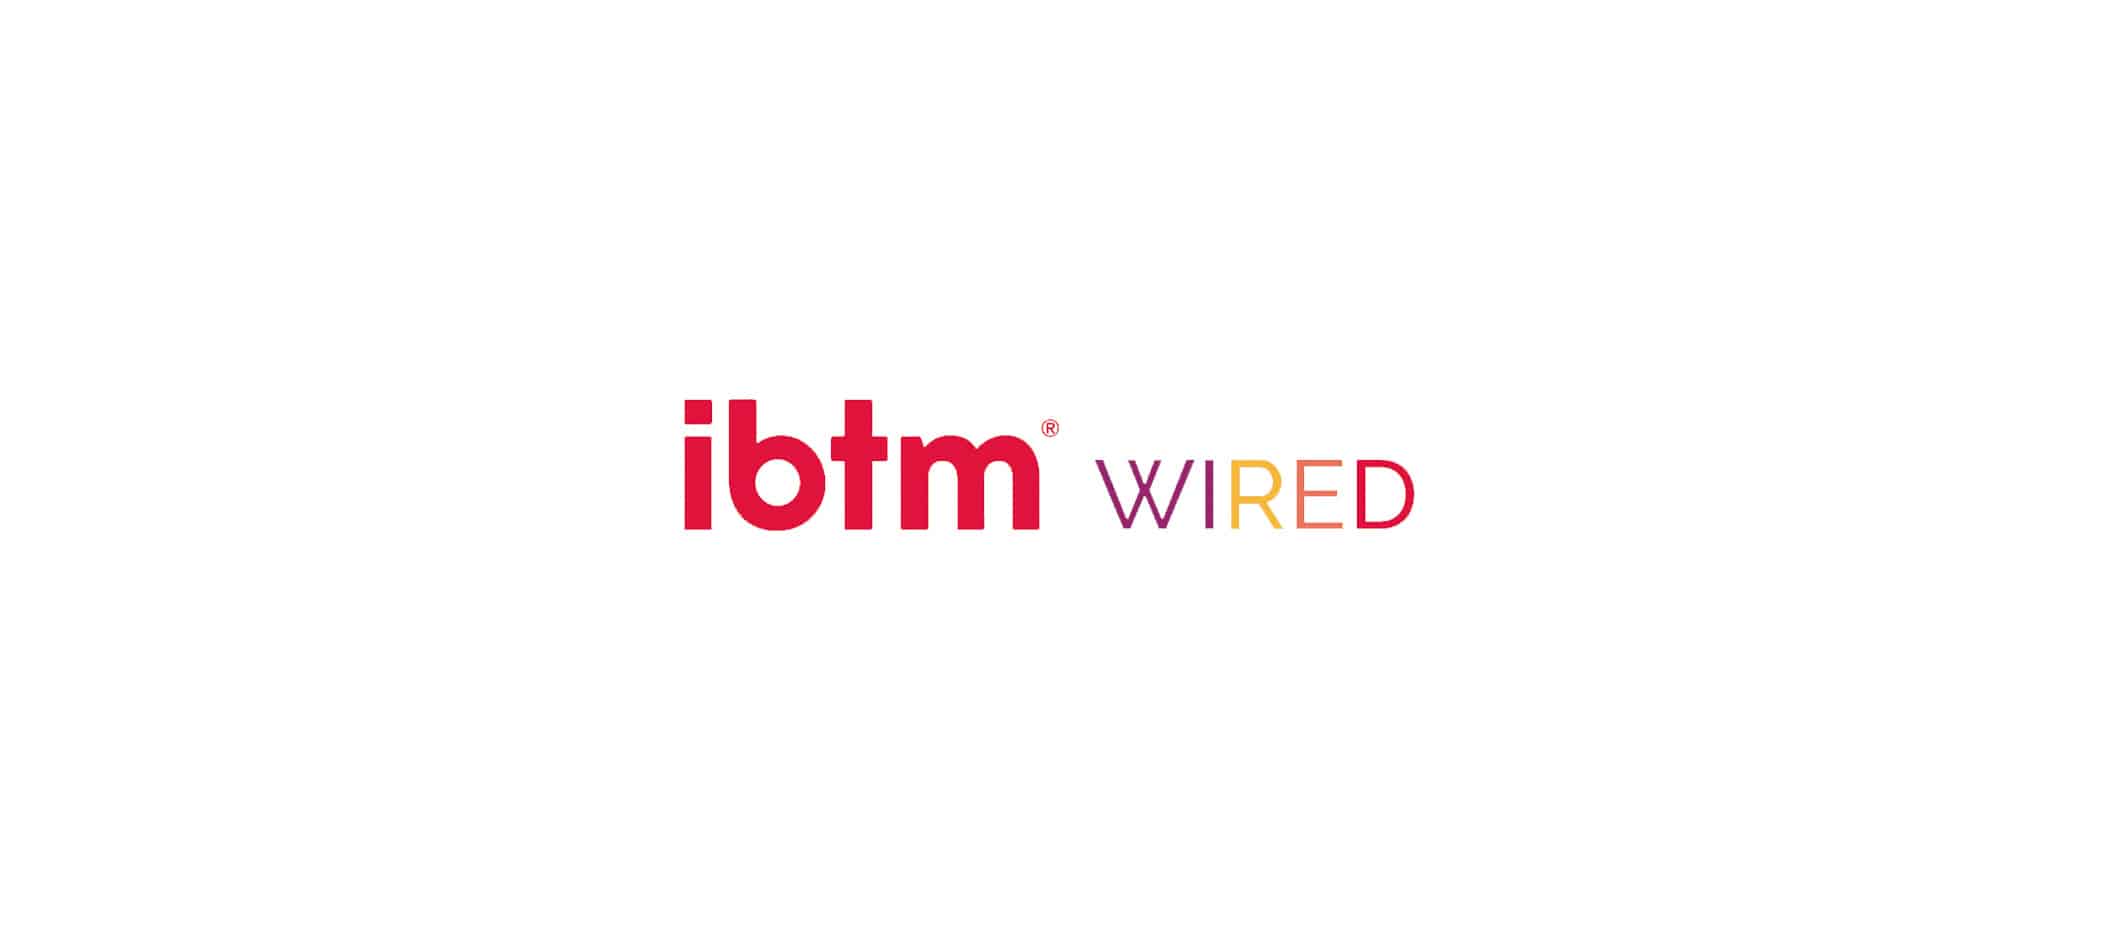 IBTM Wired reveals first details of Hosted Buyers and Exhibitors